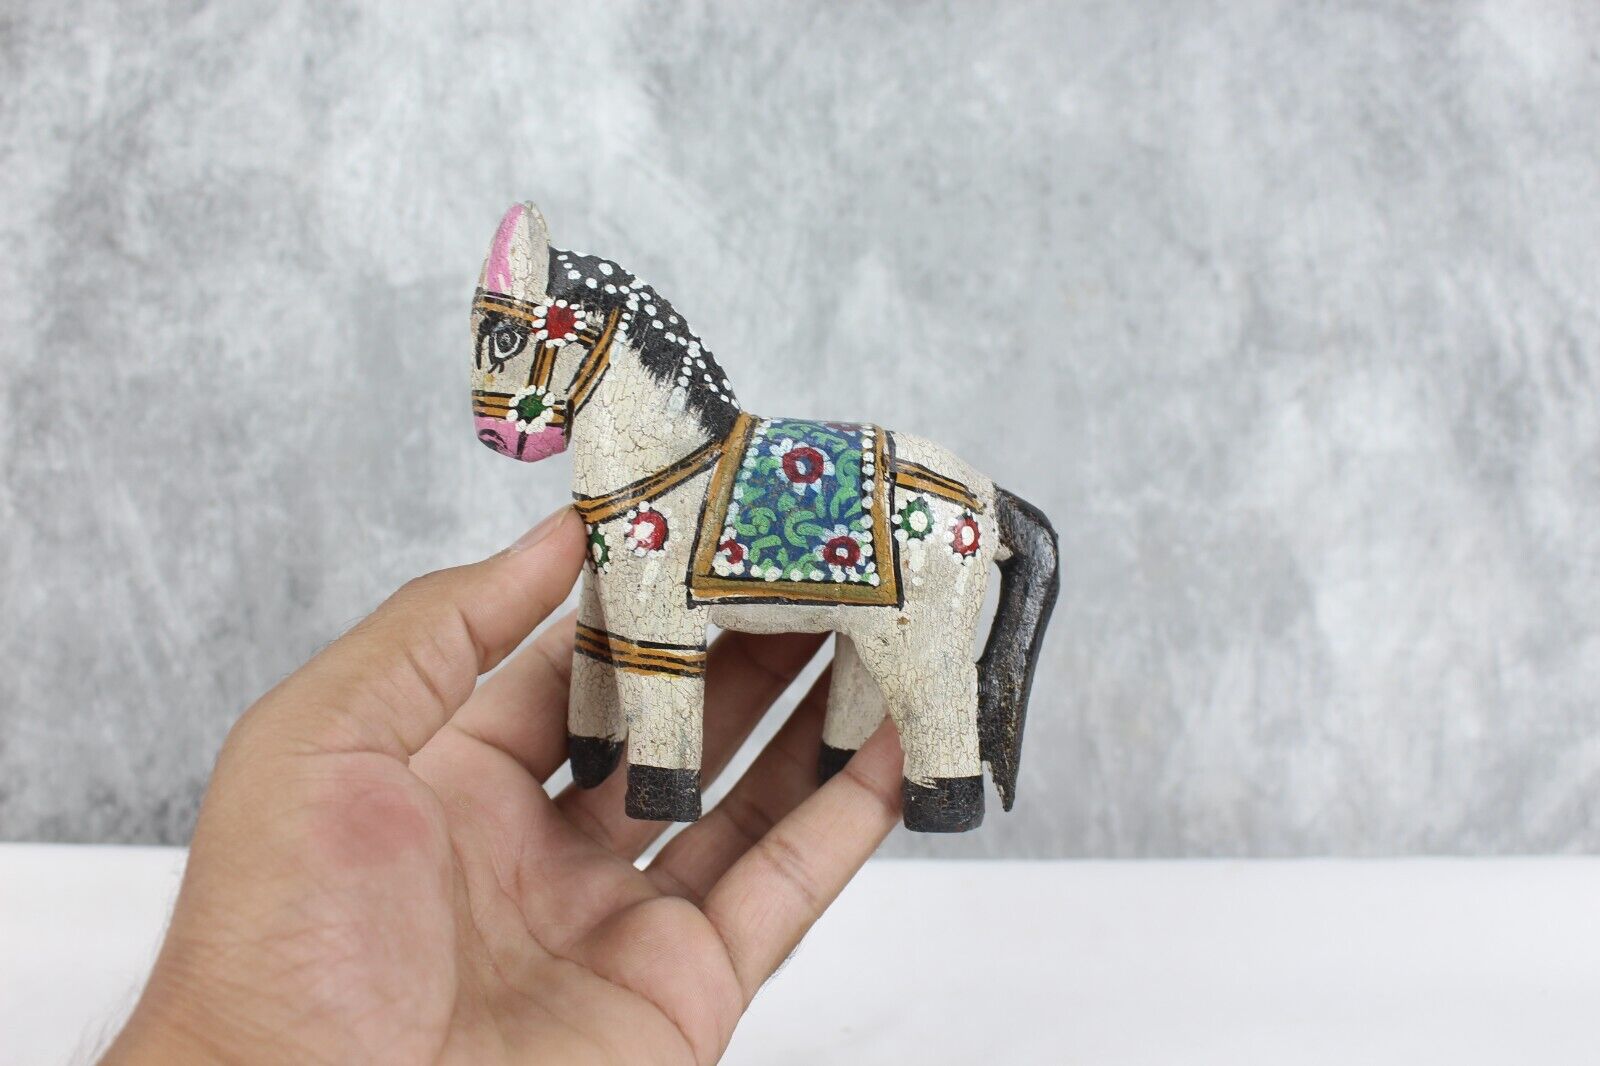 Vintage Hand-Painting Wooden Small Horse Shape Statue Toy Decorative Collectible